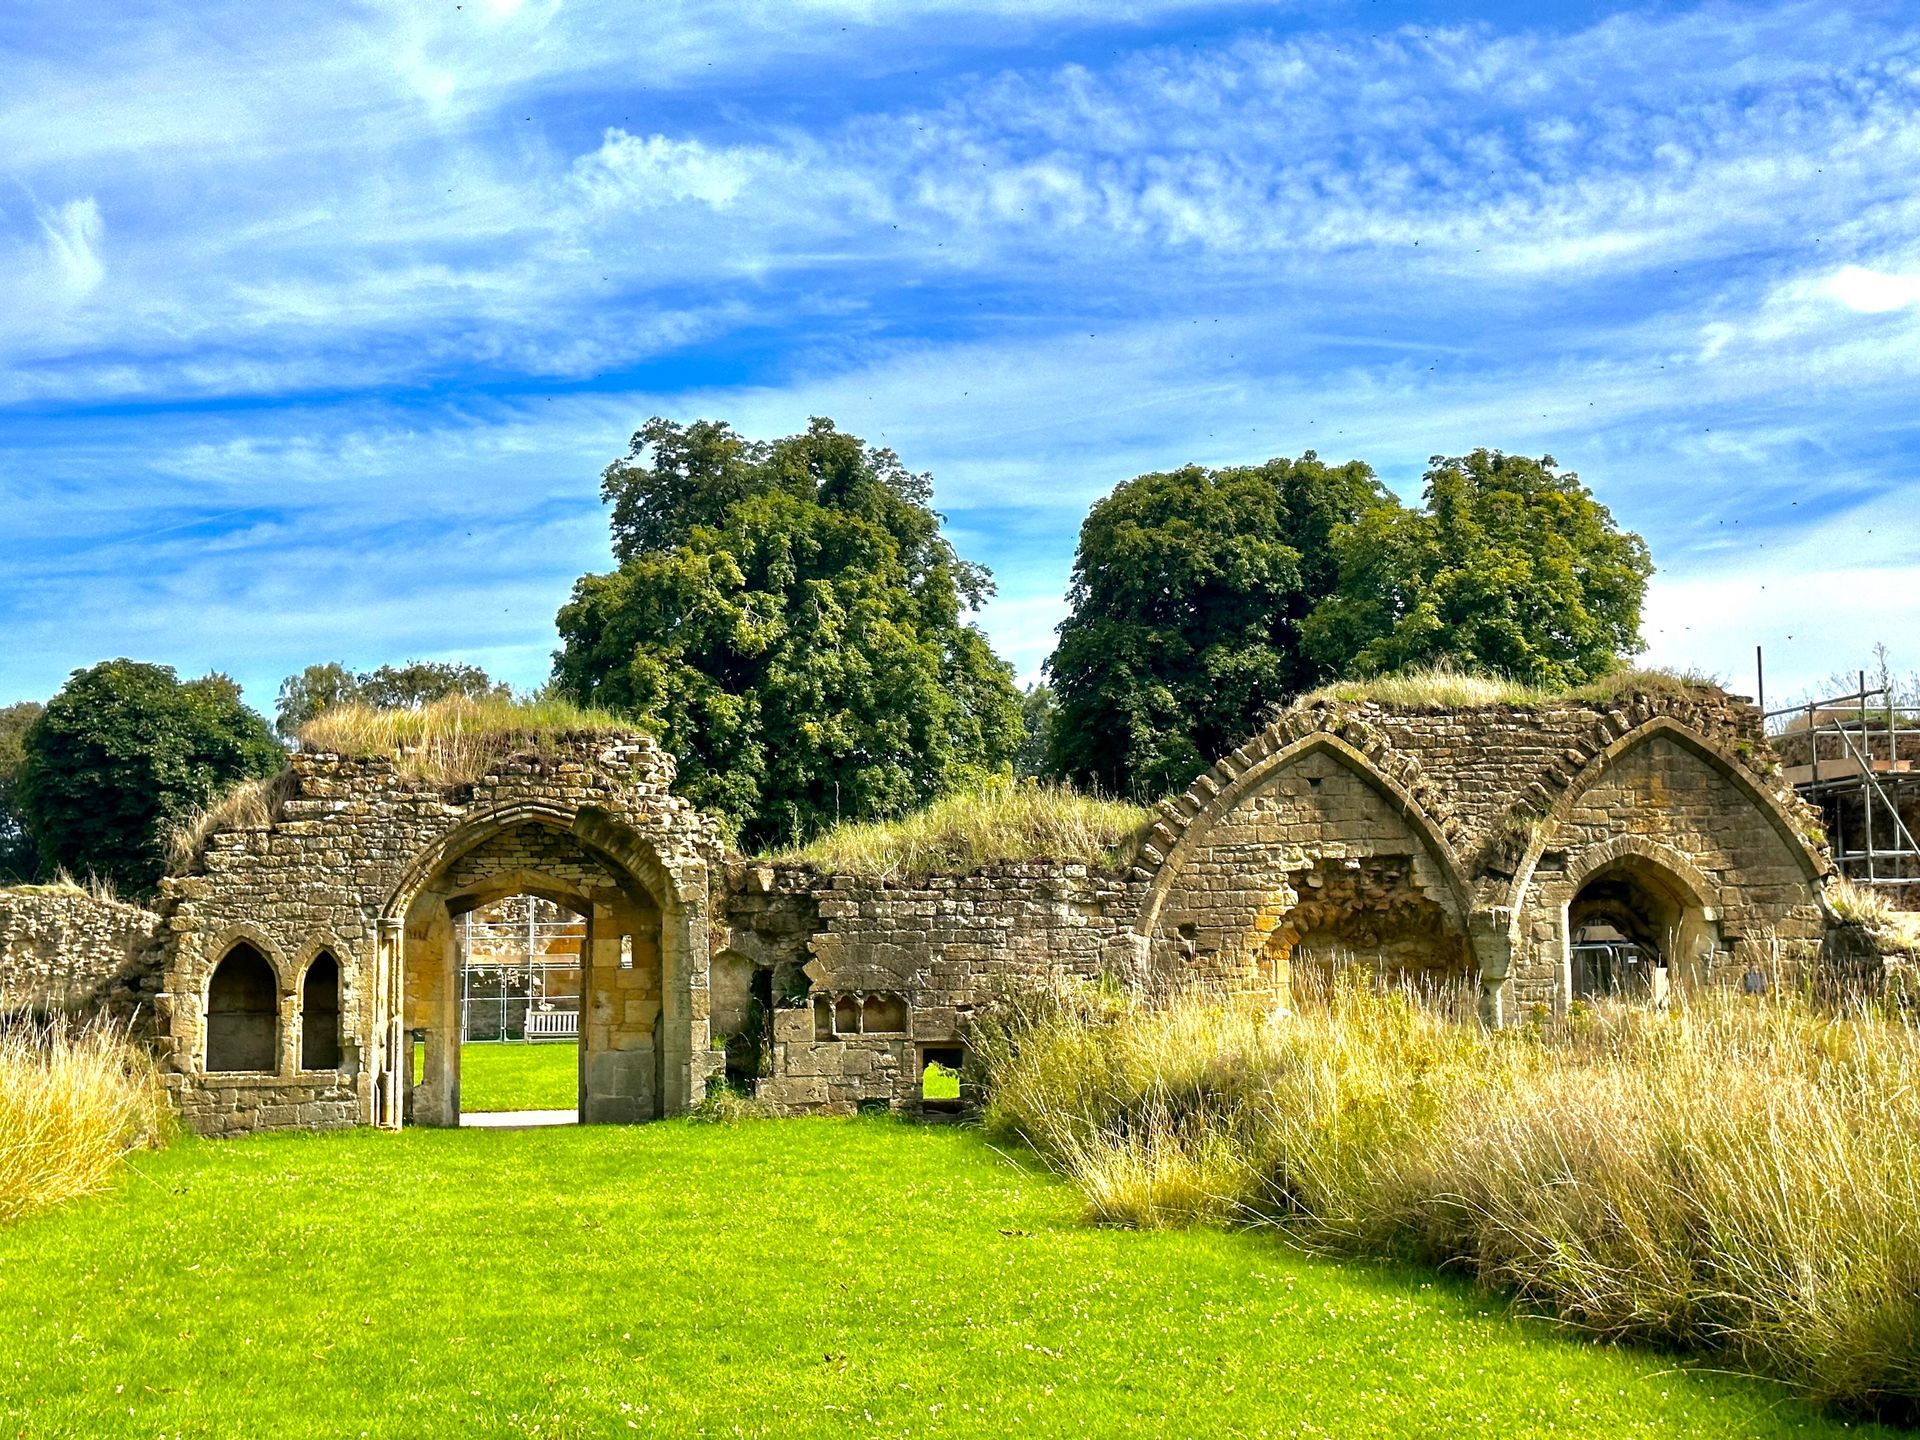 The runes of the Hailes Abbey on a sunny day